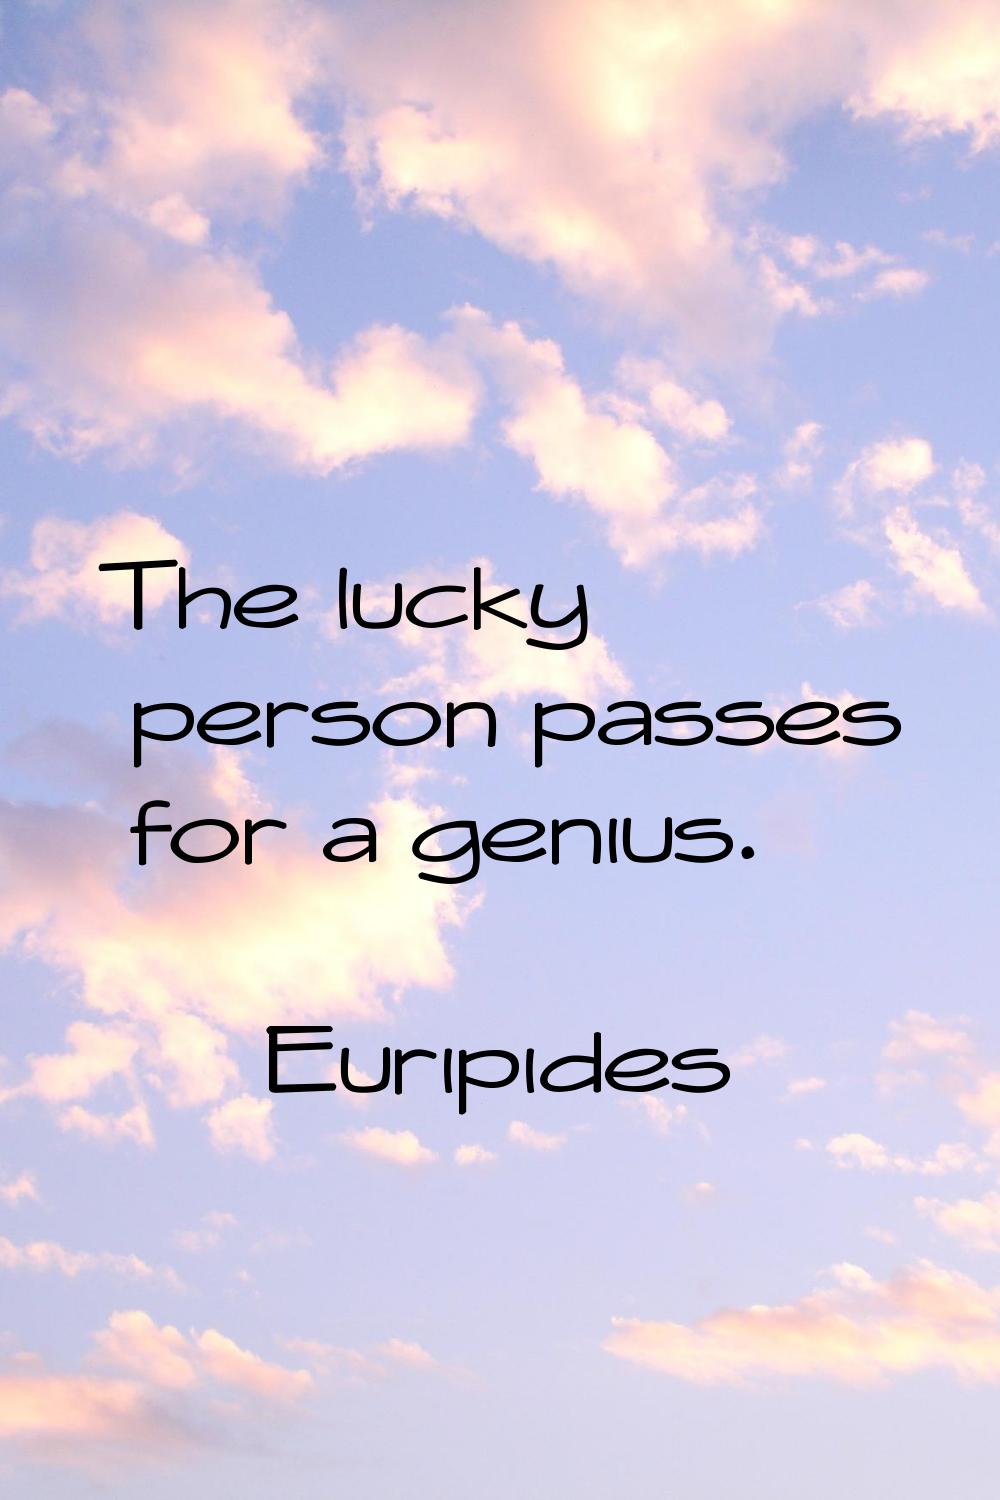 The lucky person passes for a genius.